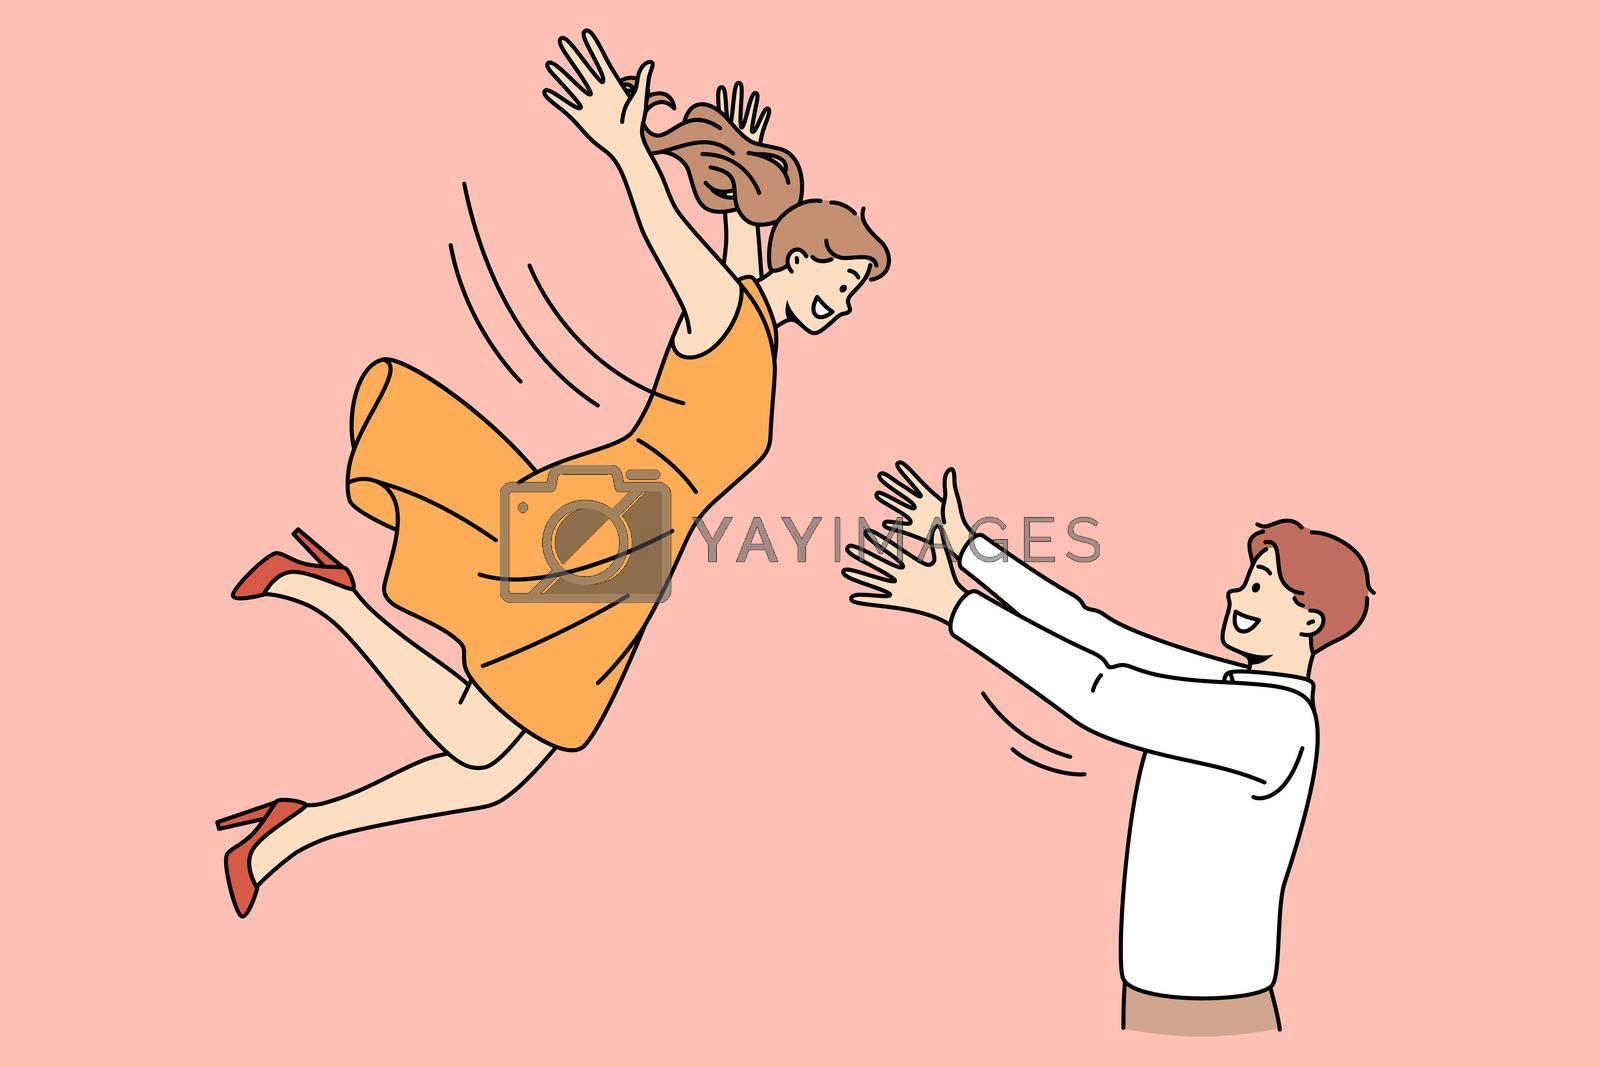 Romance dating and happiness concept. Smiling man boyfriend husband standing and catching falling down to his arms woman girlfriend wife vector illustration